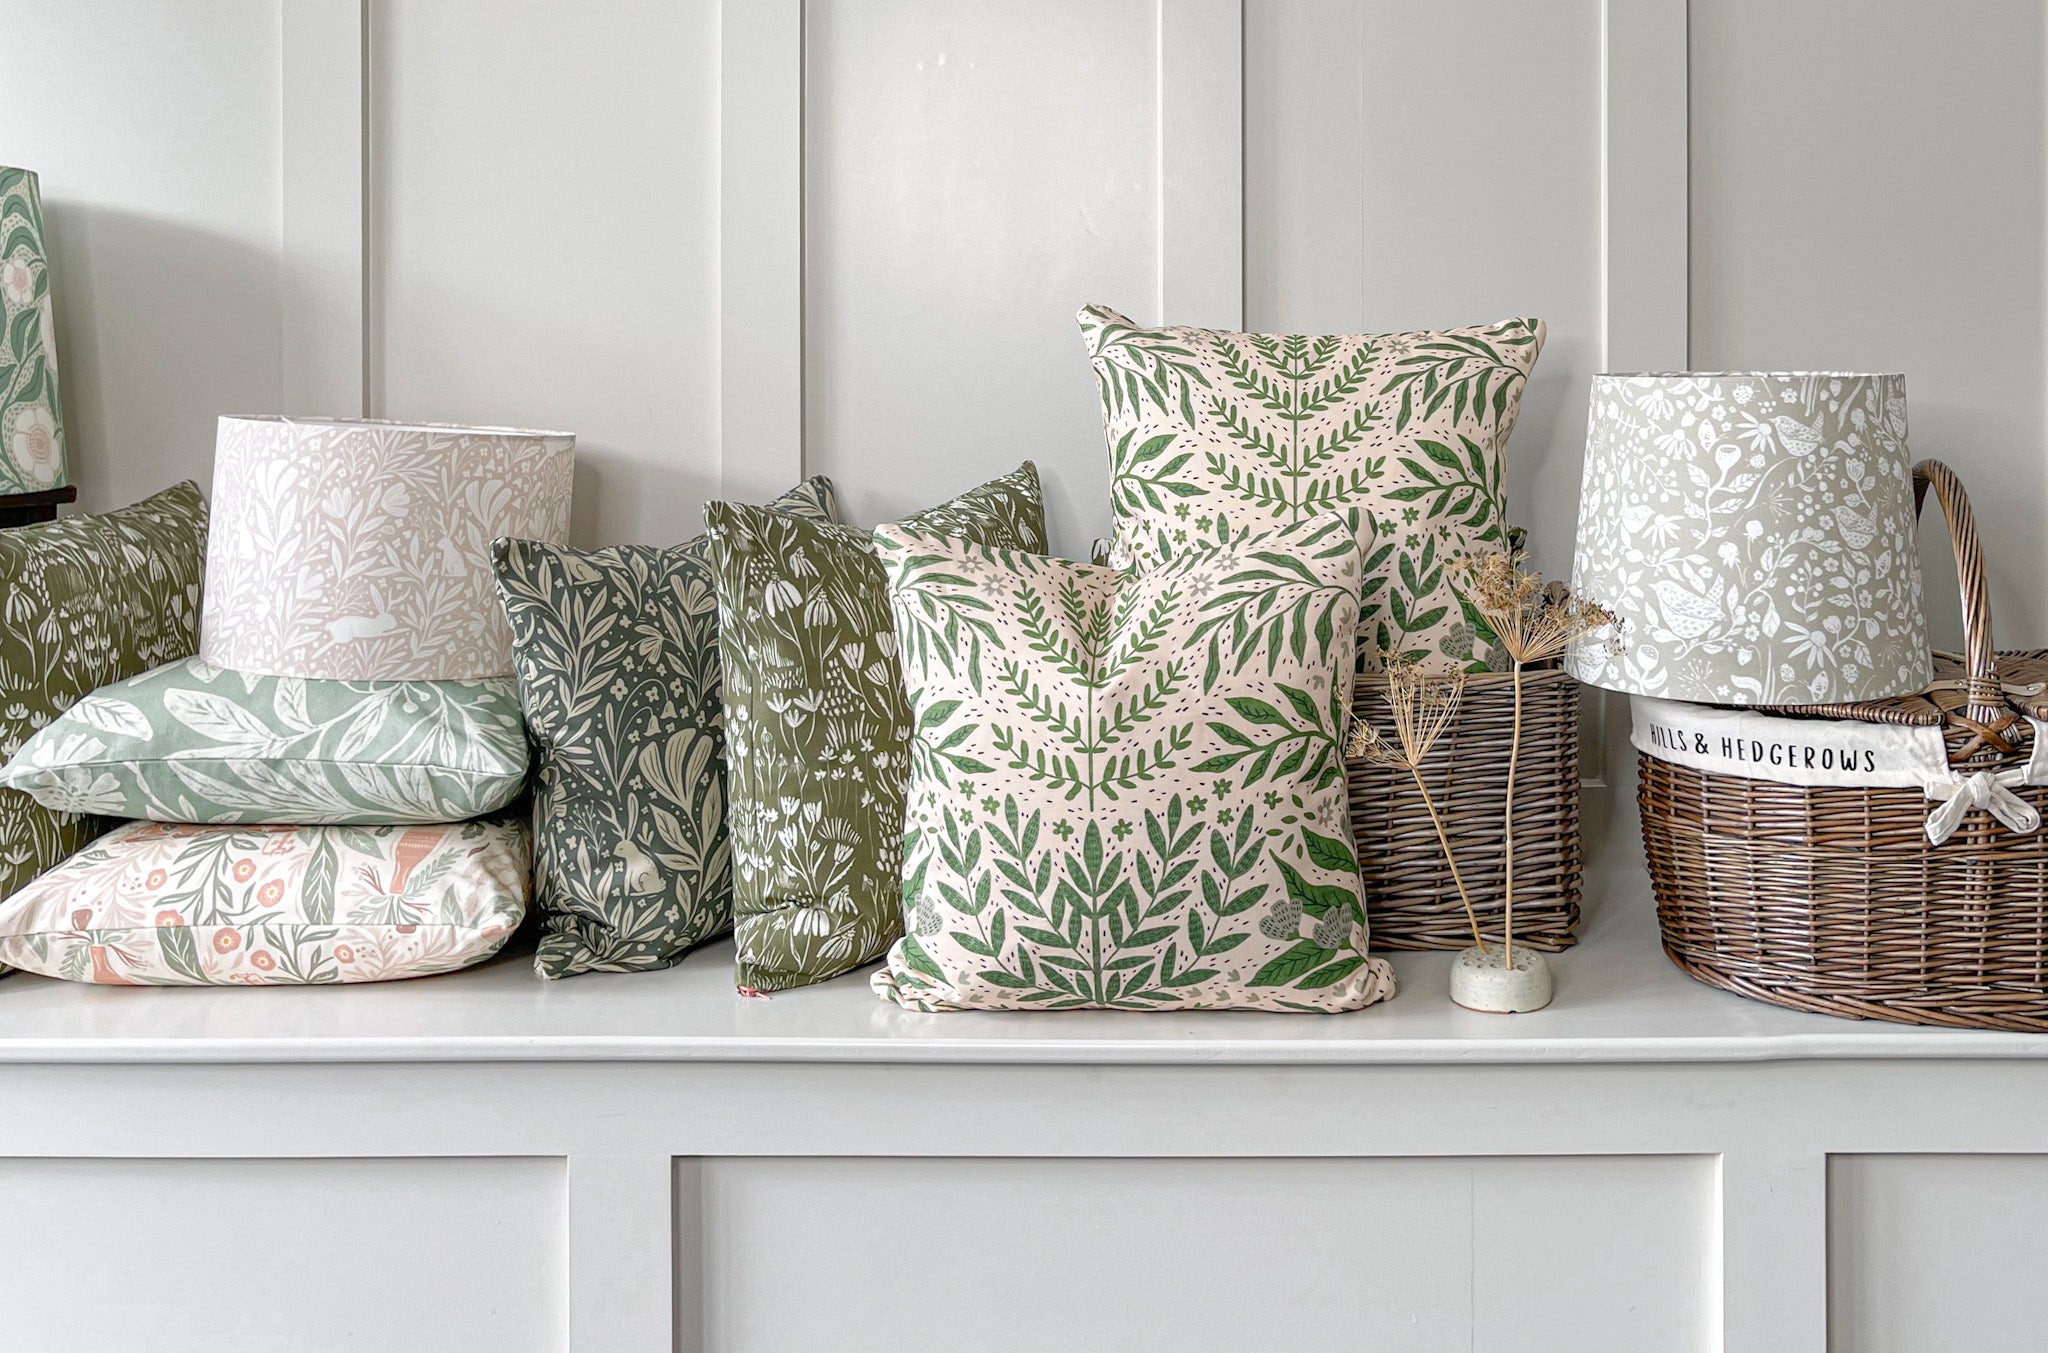 Handmade Nature-inspired decorative scatter cushions and handcrafted botanical lampshades on a bench